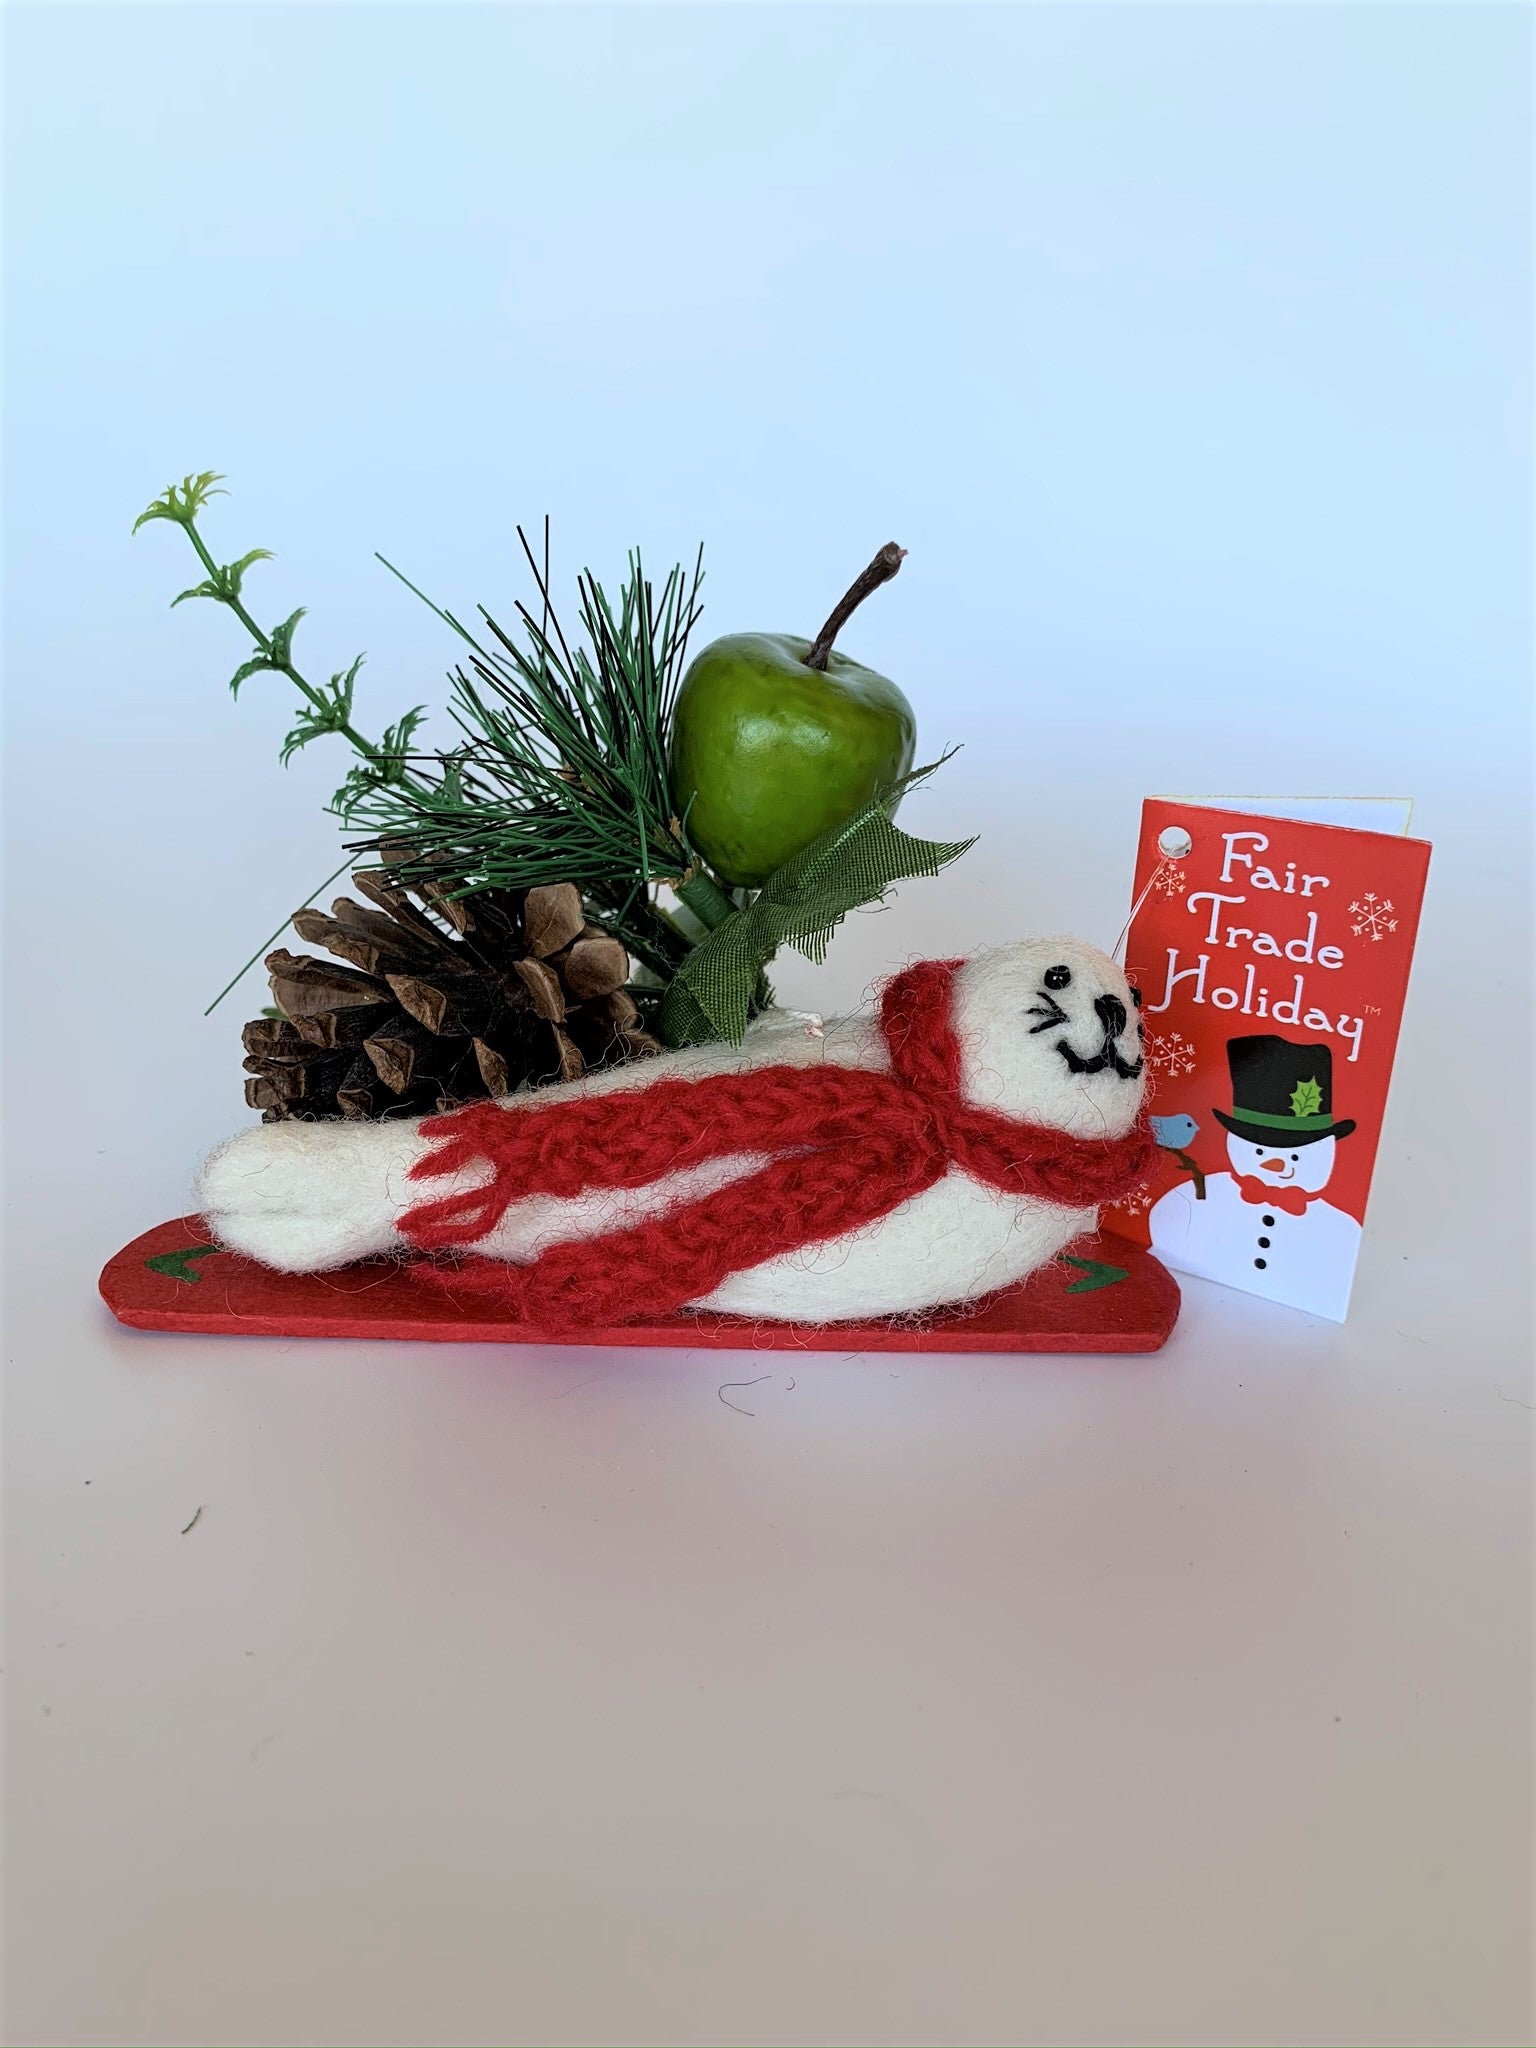 This is a side view of the snowboarding seal Christmas ornament that is handcrafted (fair trade) using 100% natural wool. The snowboard is handmade using paper that is hardened and feels almost like thin wood. It is off-white with black accents (eyes, nose, whiskers etc.), wears a red winter scarf and is lying on a red snowboard with green accents. Approximately 5.5"x2"x1.75". It comes with a fair trade holiday "to/from" tag to use if giving this as a gift.